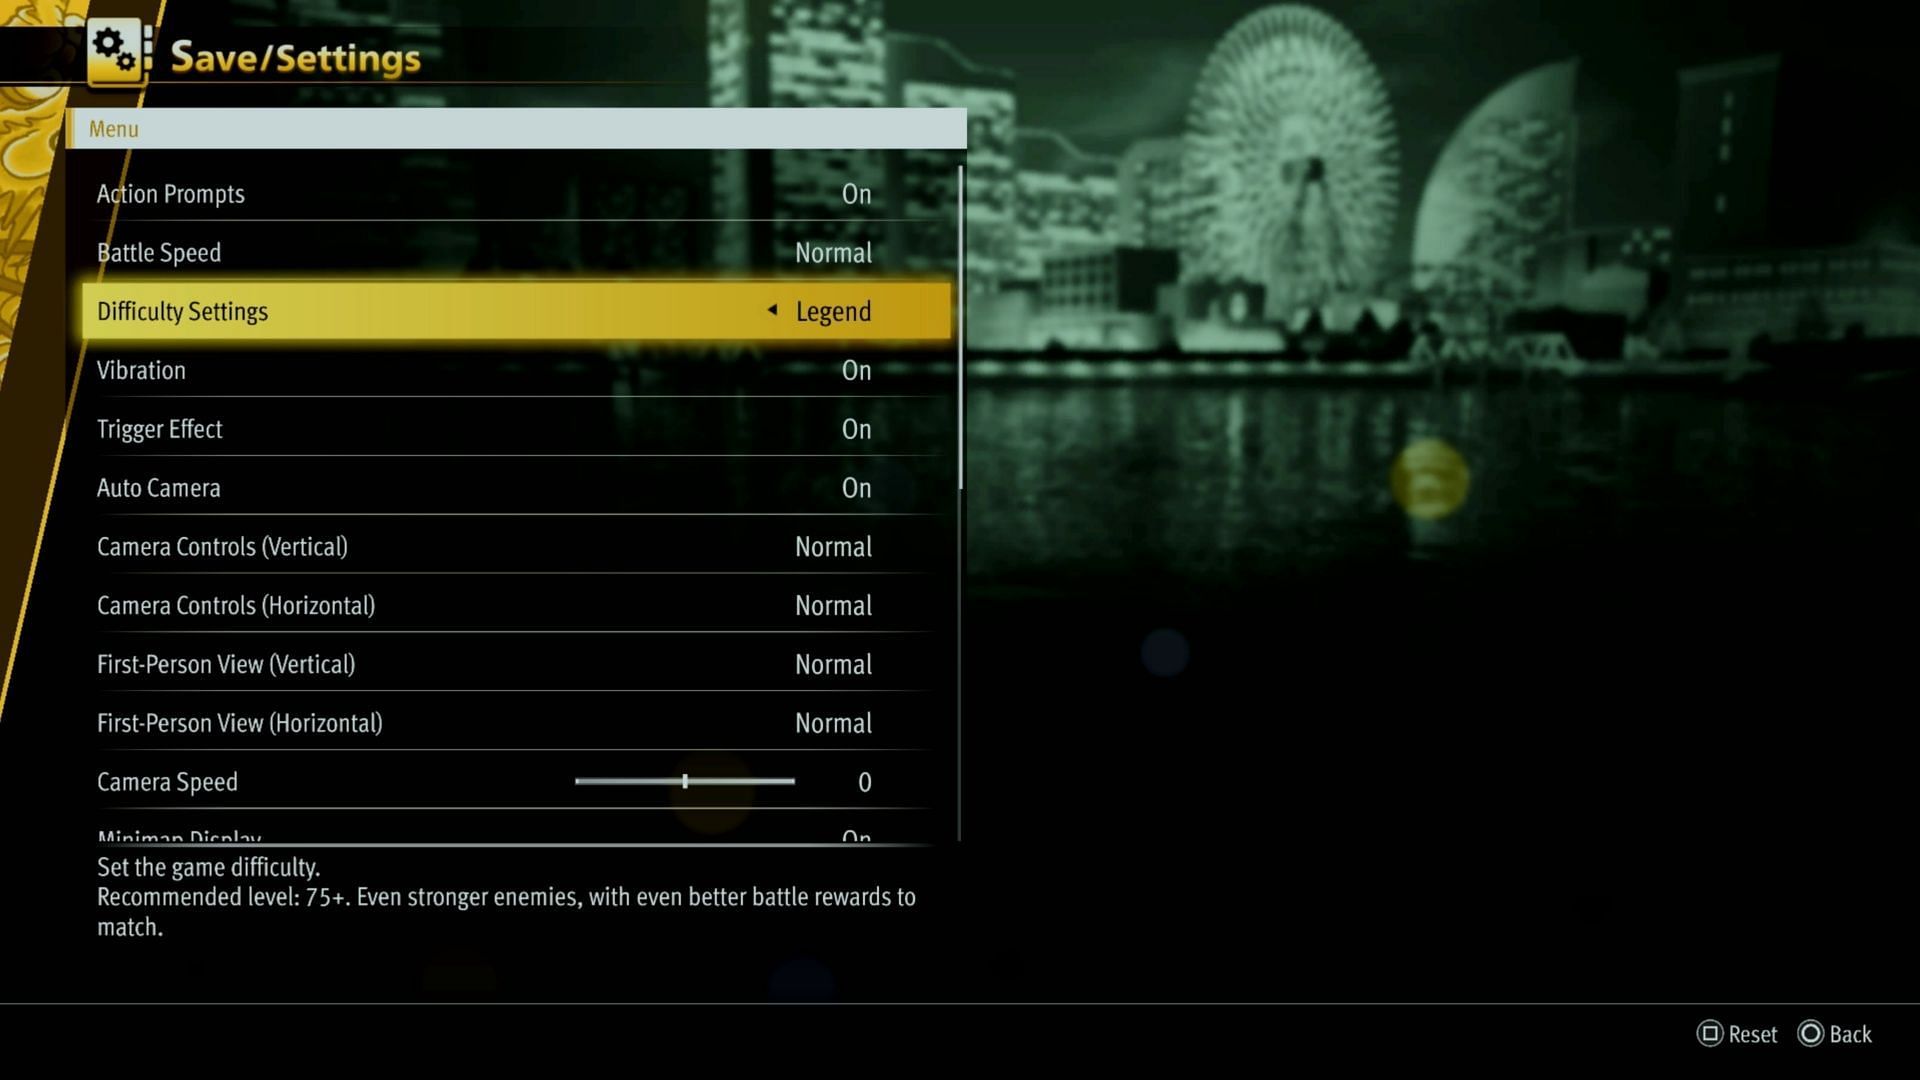 You can adjust the settings - once you beat the game (Image via SEGA)